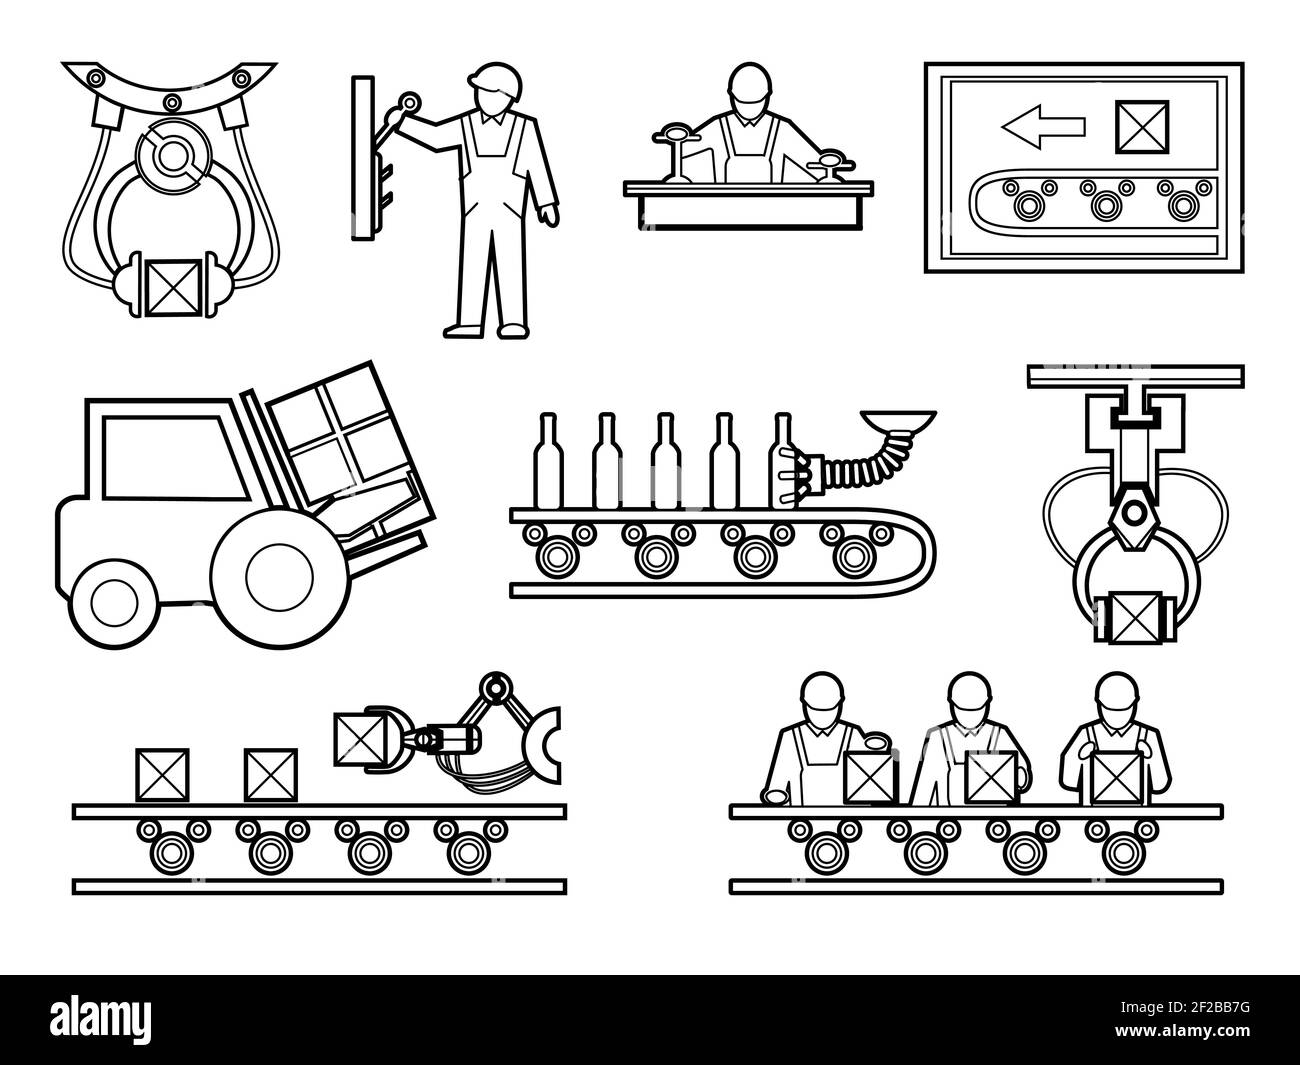 Industrial and manufacturing process icons set in line art style. Equipment for production, machine for plant or factory, vector illustration Stock Vector